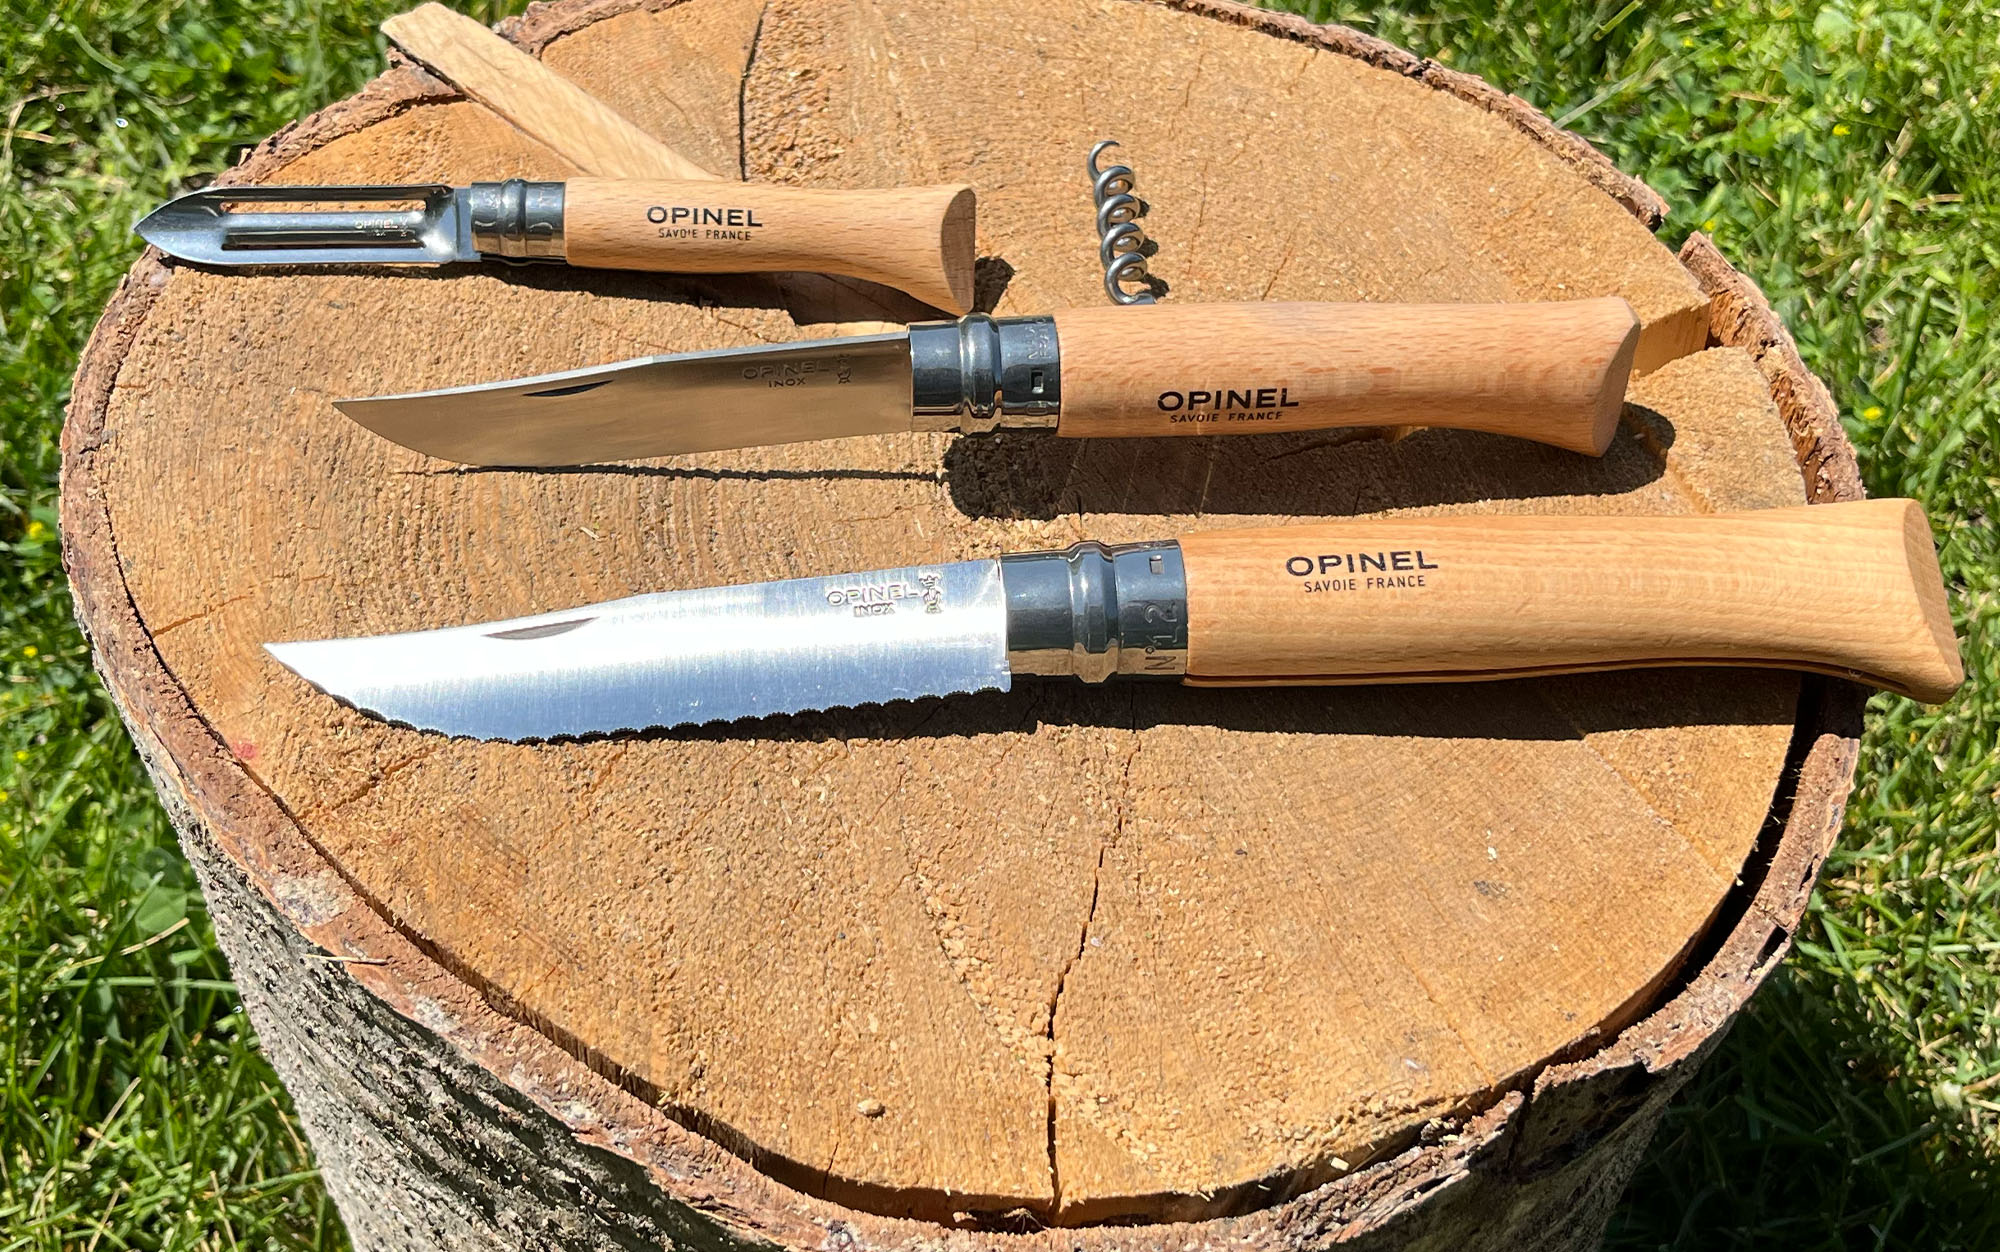 Opinel cooking knives are laid out.